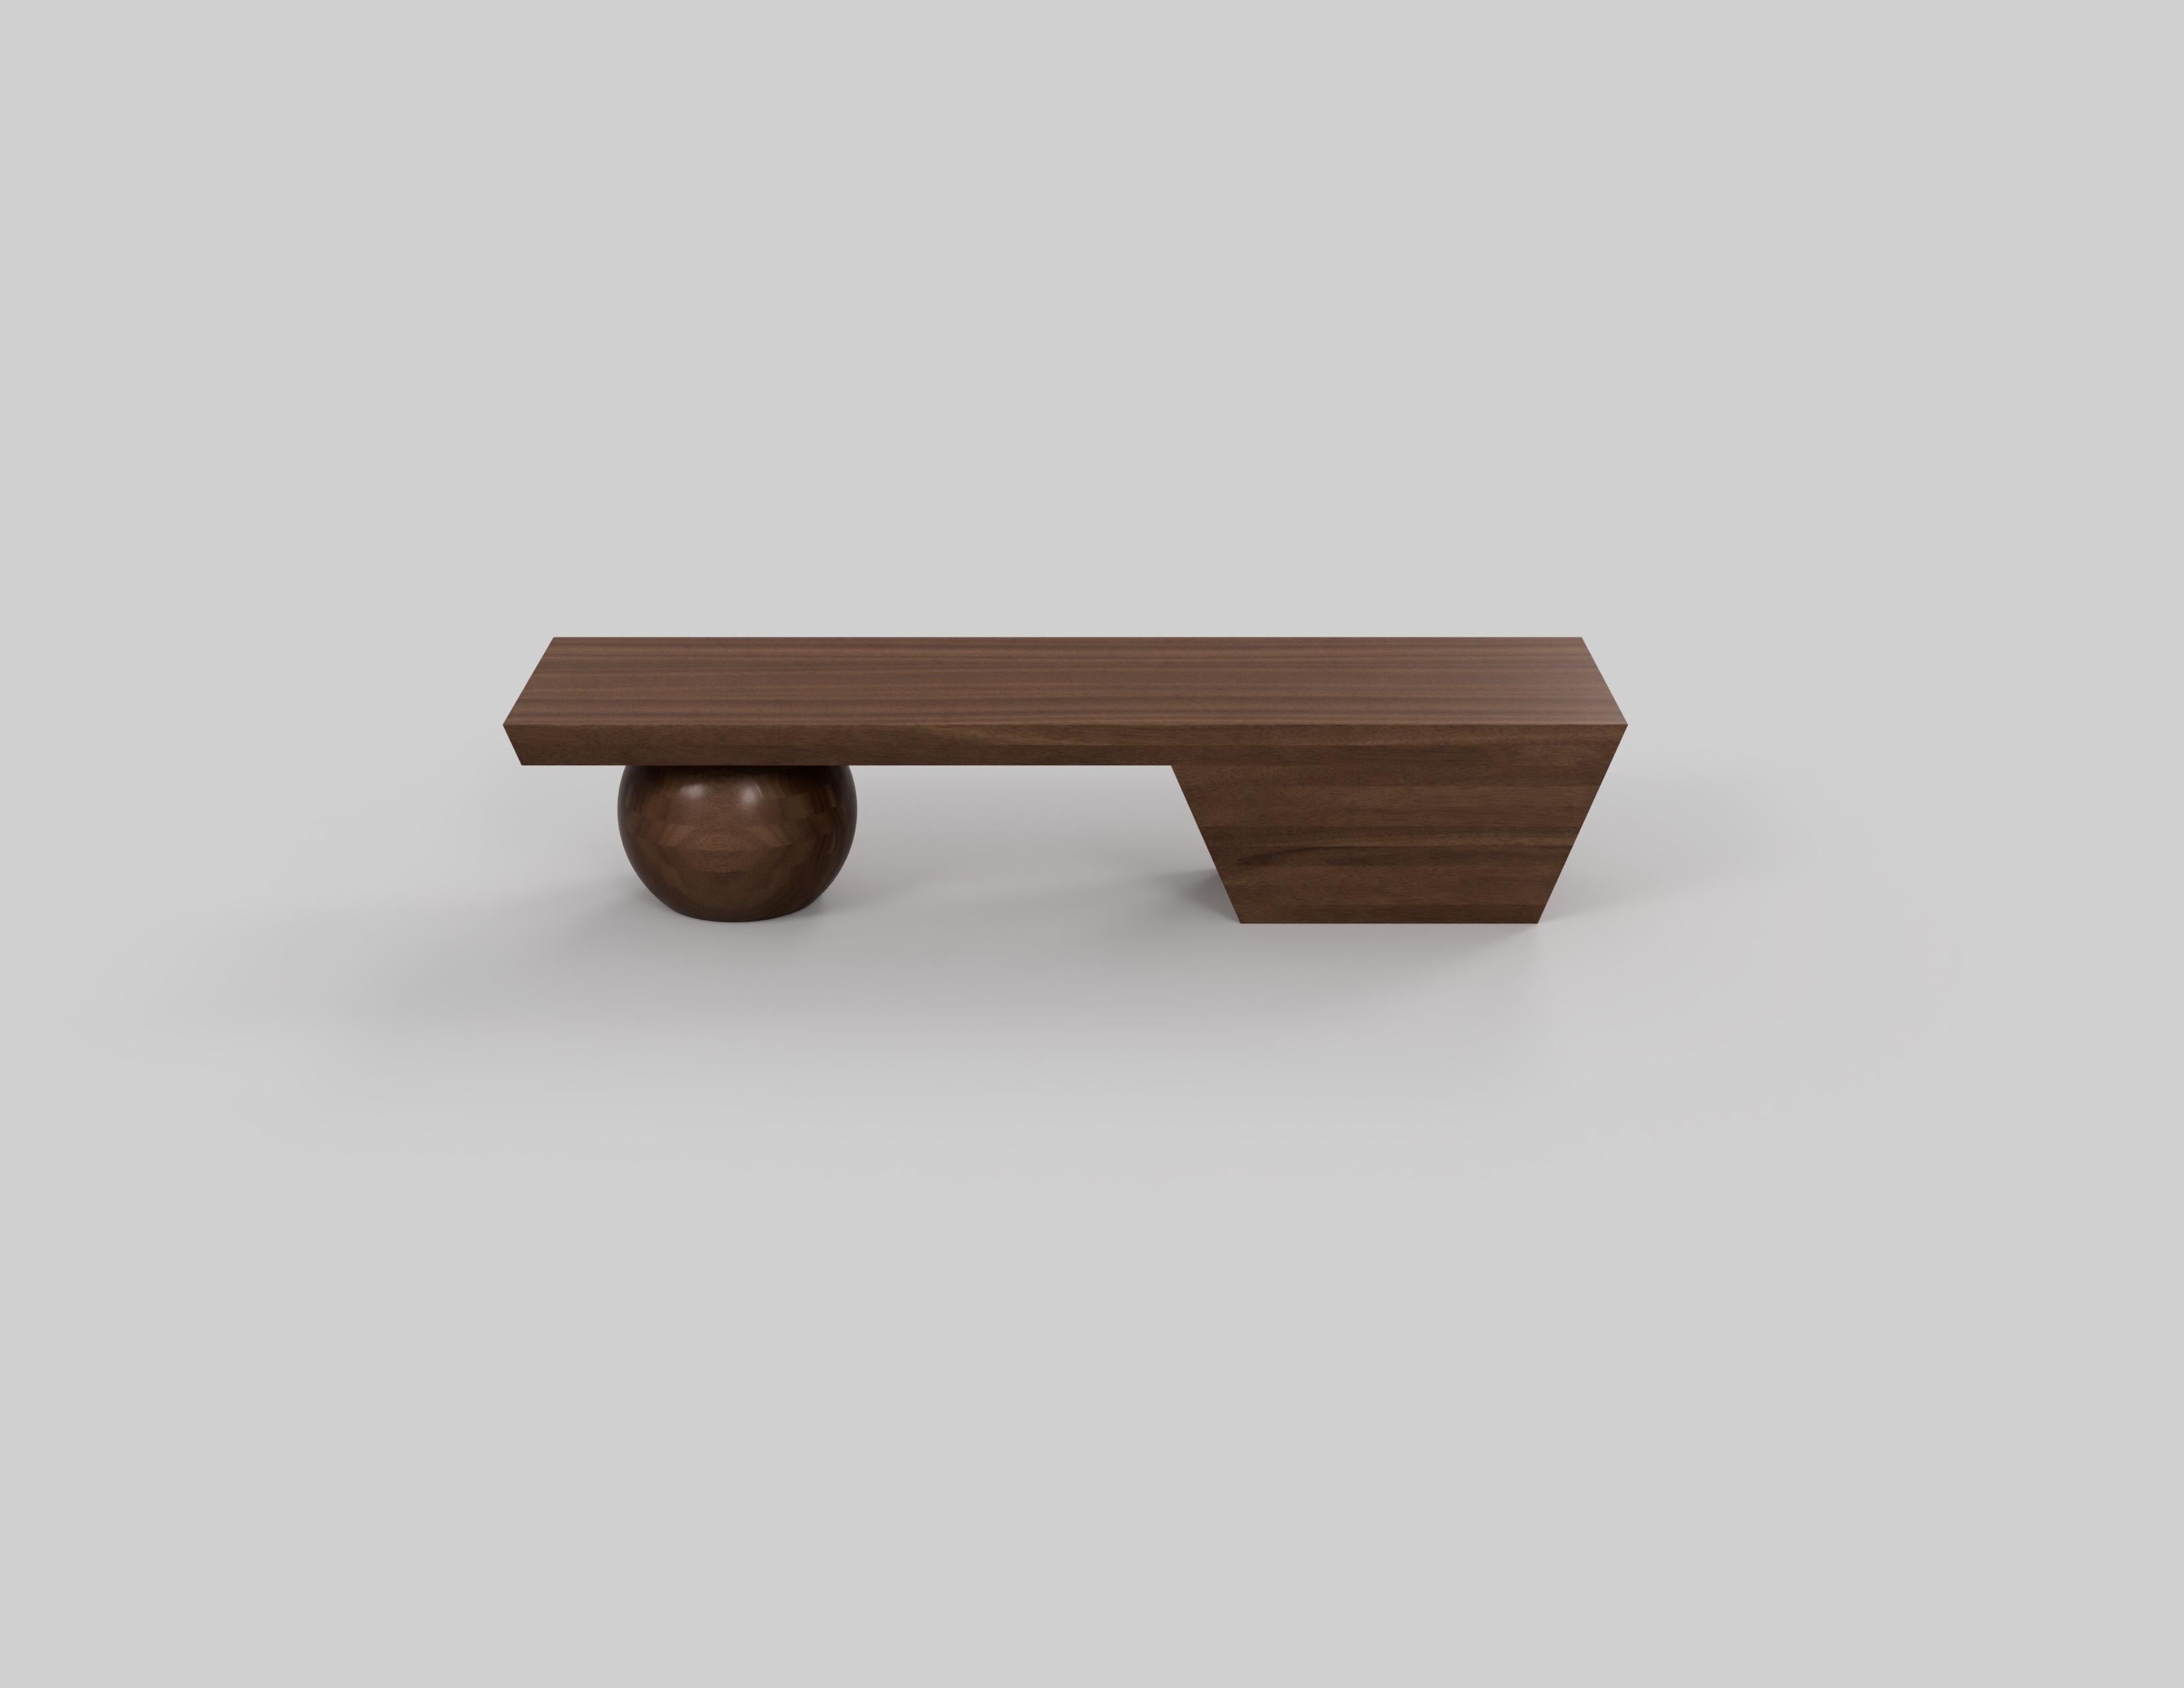 Made-to-order
Bollbänk Mahogany
Bench by Johan Wilén

A true testament to the designer’s signature style, redefining what we understand as the beauty of simplicity. Exquisite solid wood bench, meticulously crafted by skilled artisans. Made from